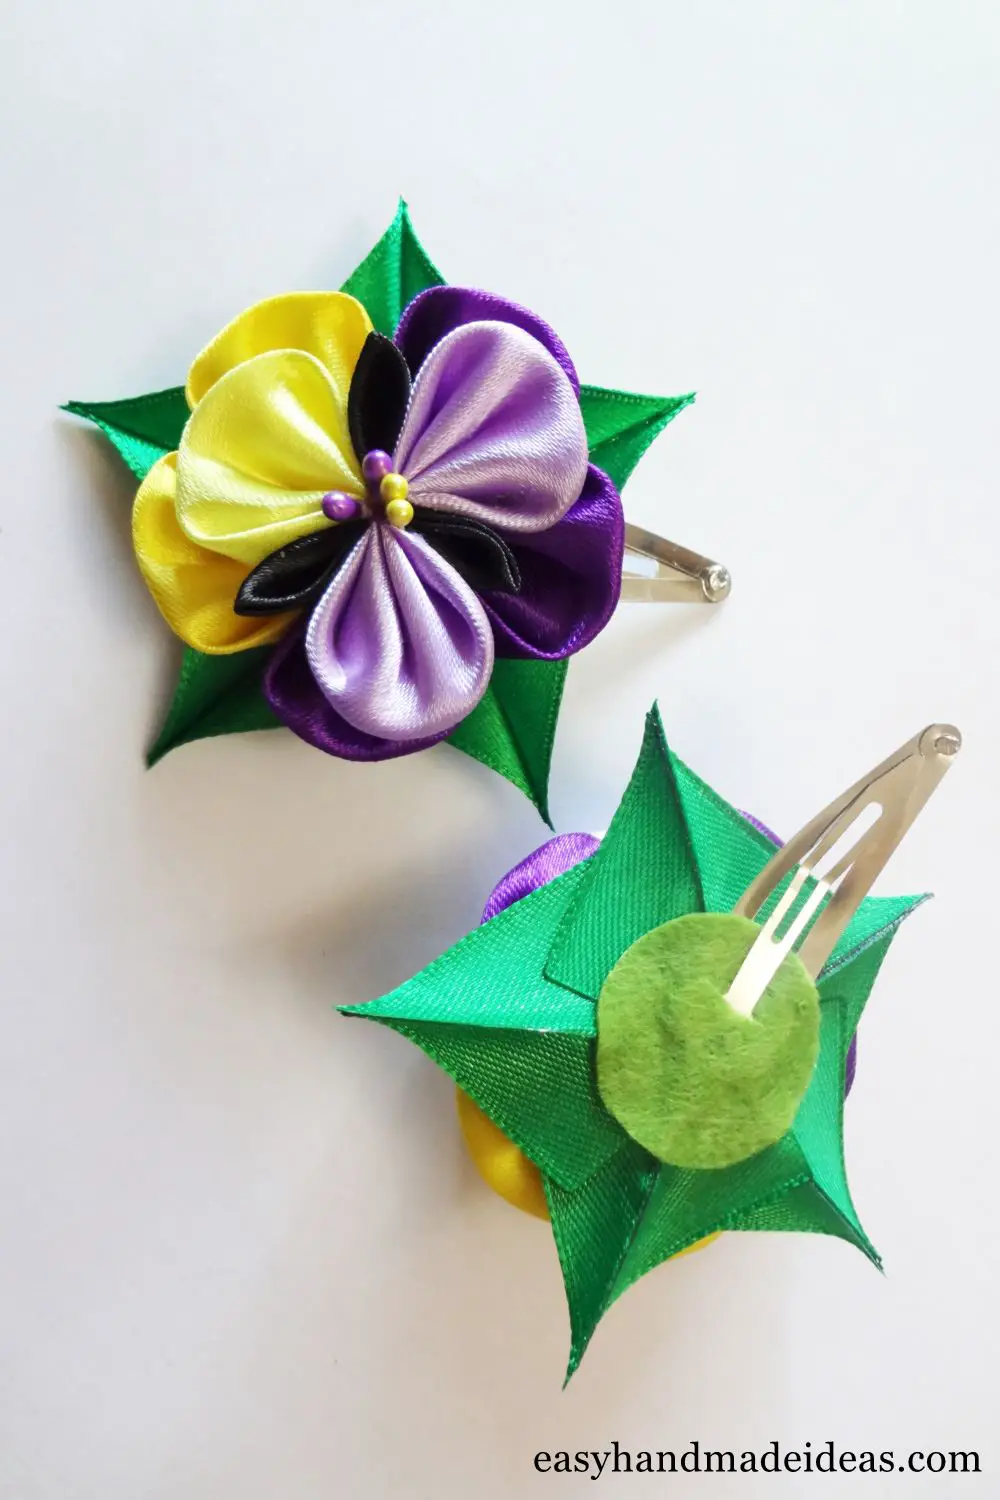 13-glued-the-hair-clips-to-the-flowers